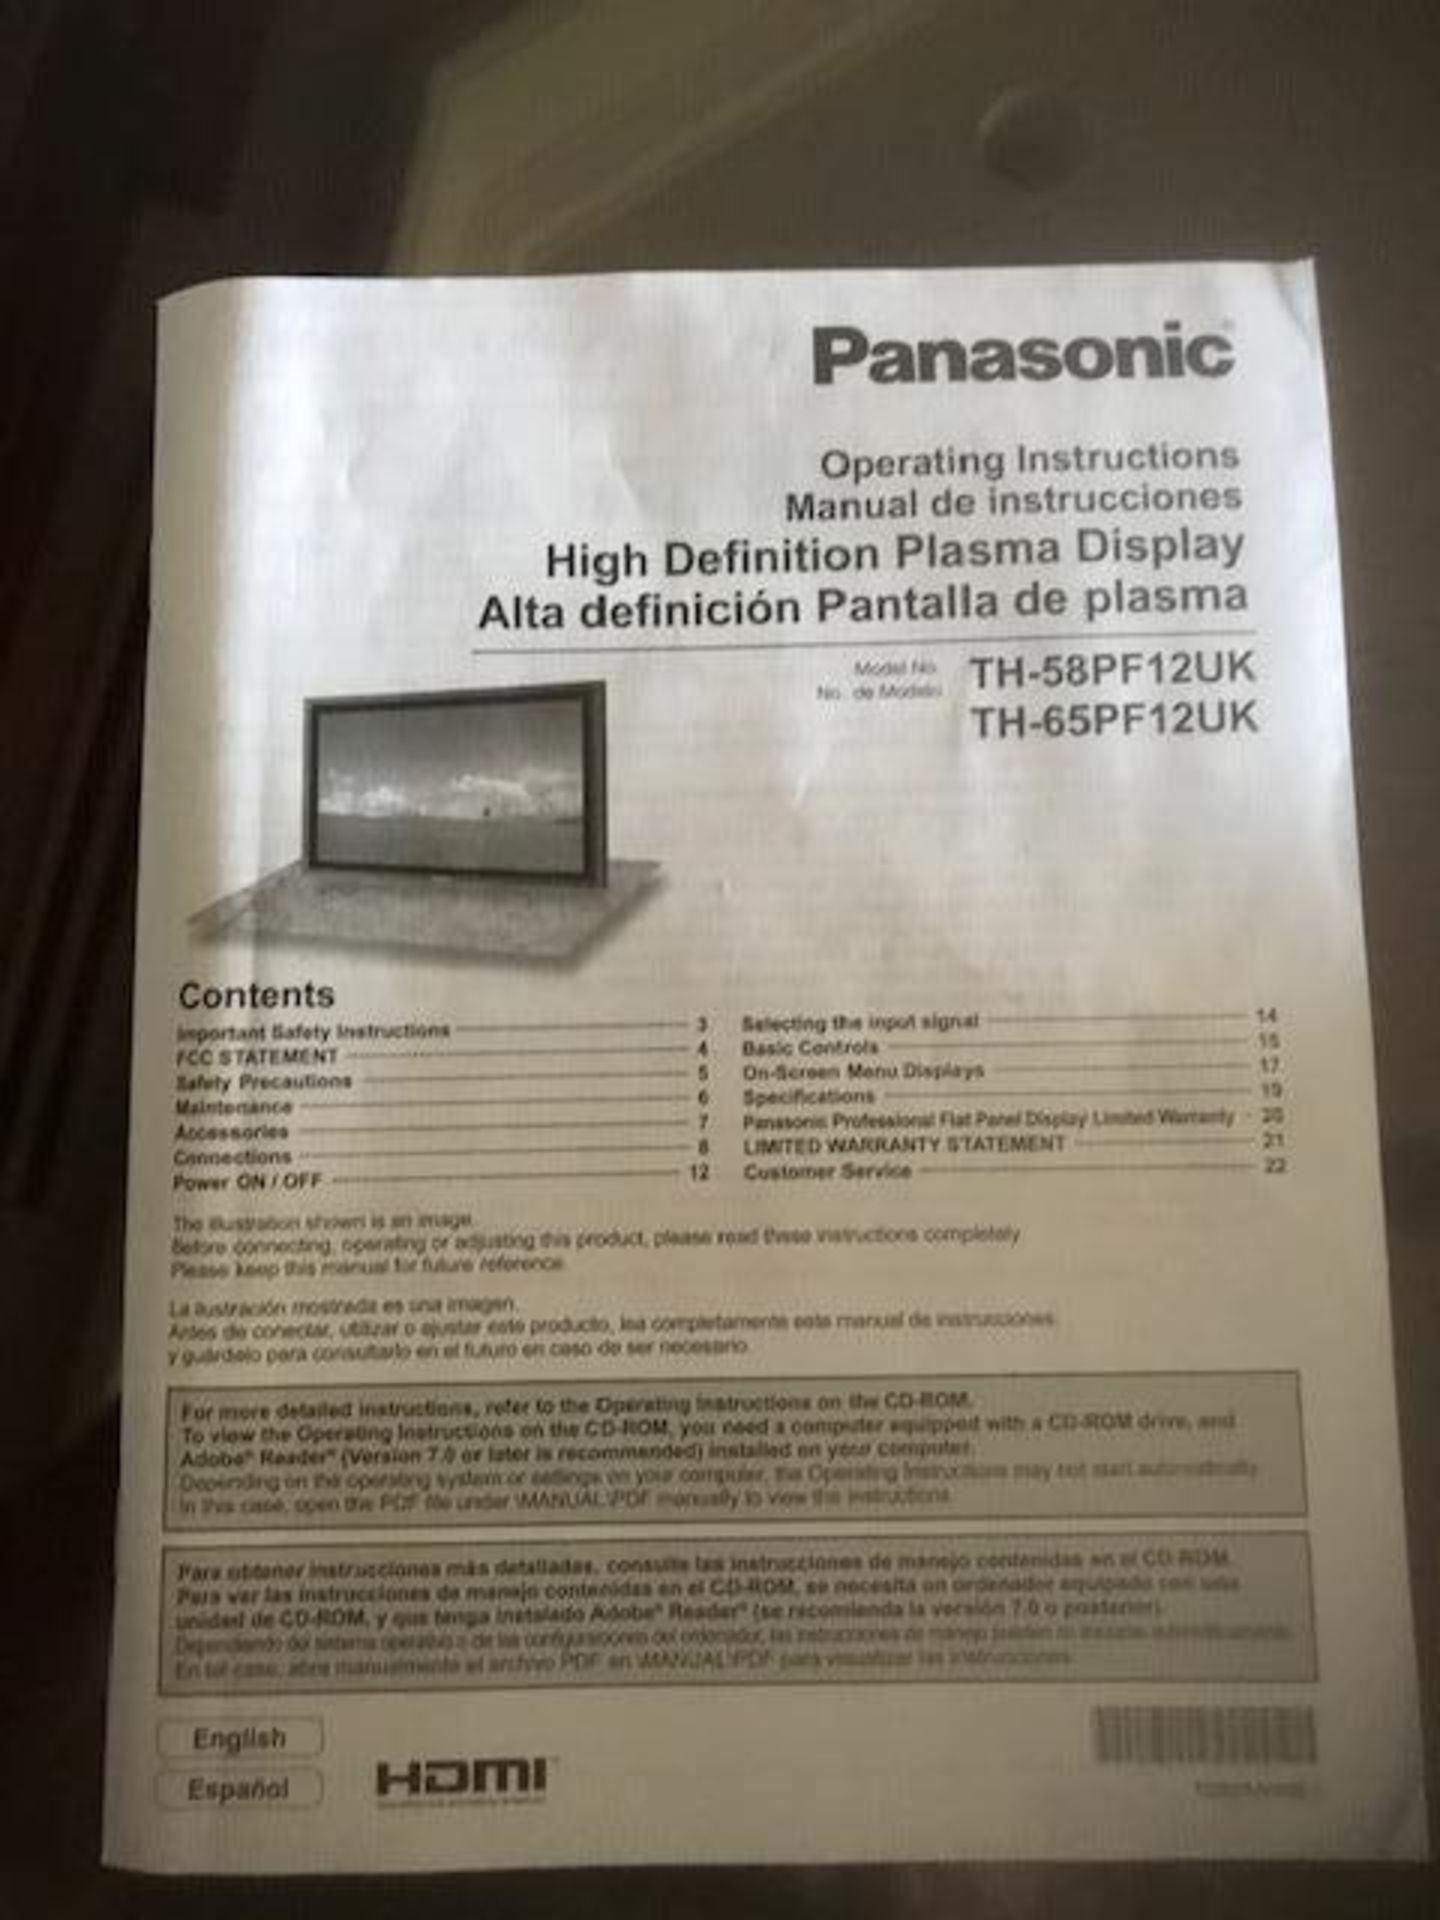 Panasonic Plasma Display 65" Model TH-65PF12 w/remote with side mount speakers - Image 4 of 4